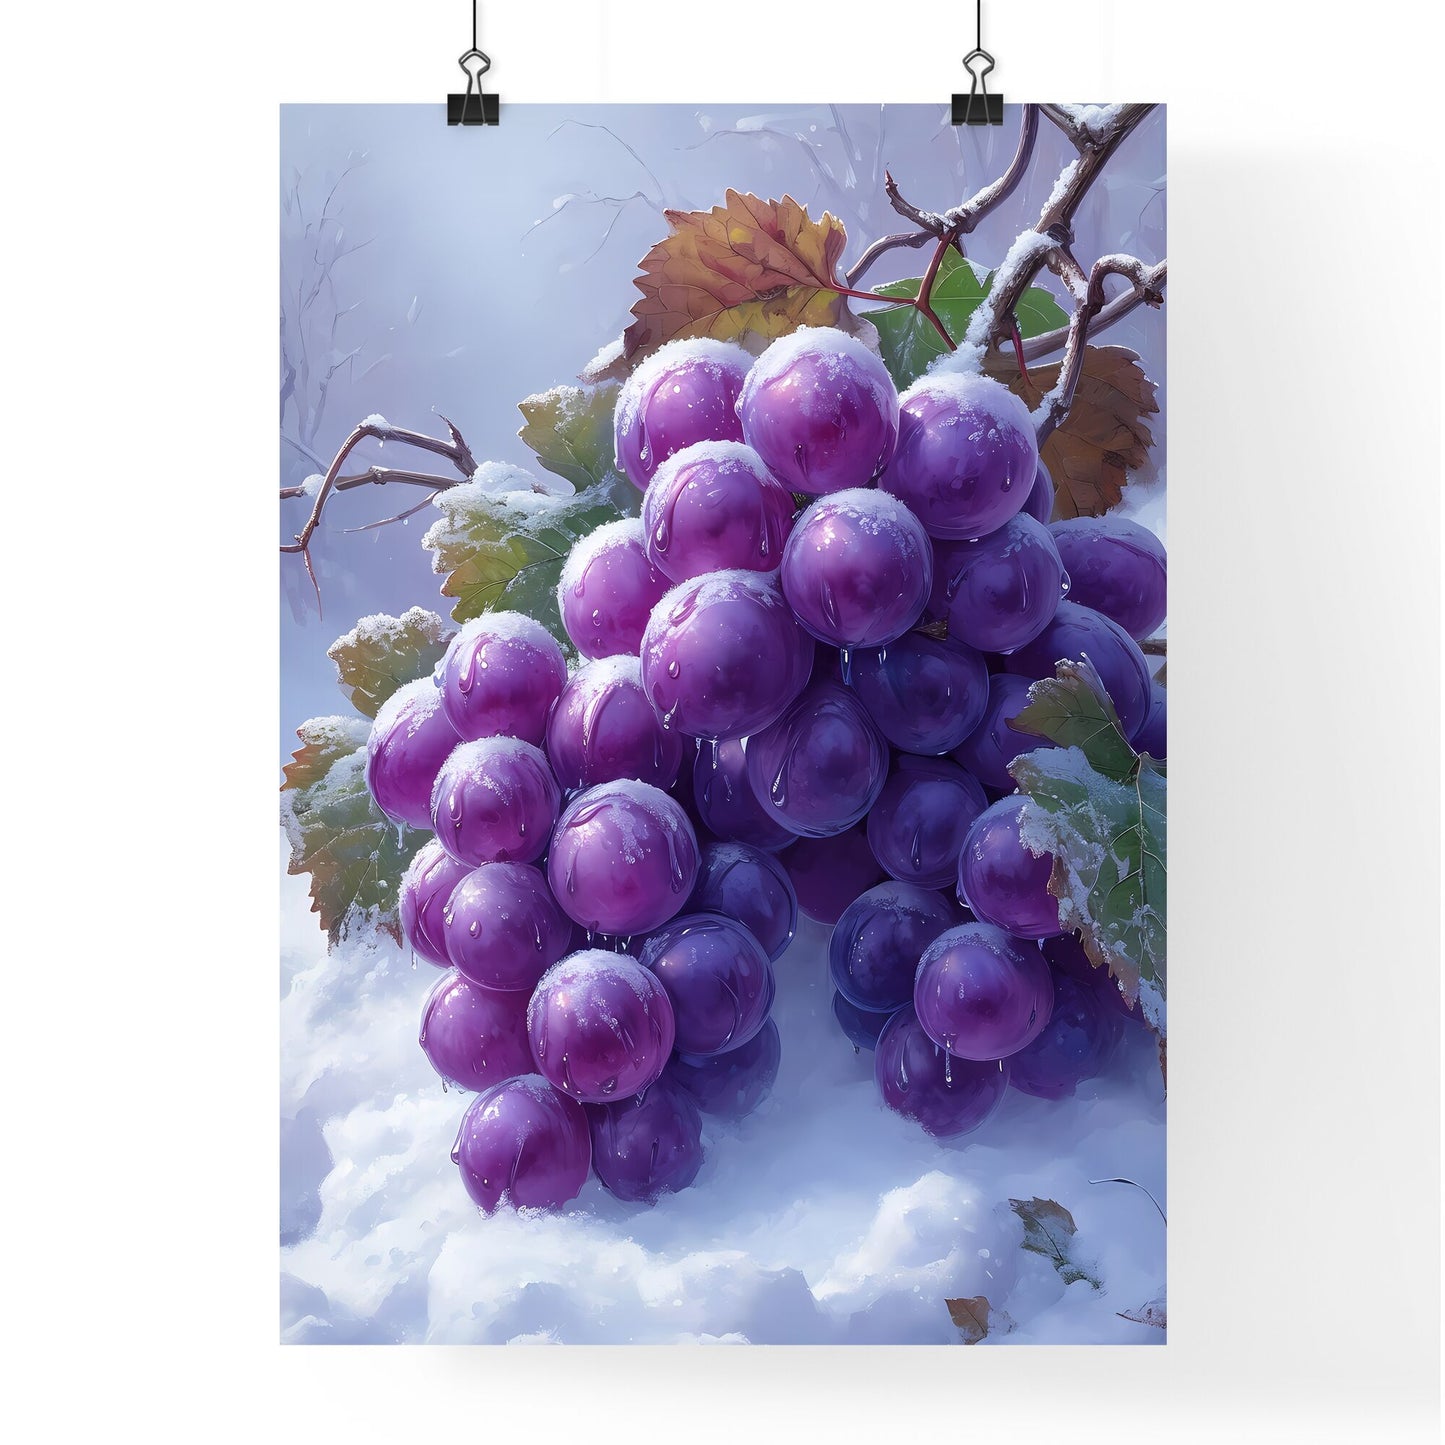 A bunch of purple grapes covered in snow - Art print of a bunch of grapes in the snow Default Title